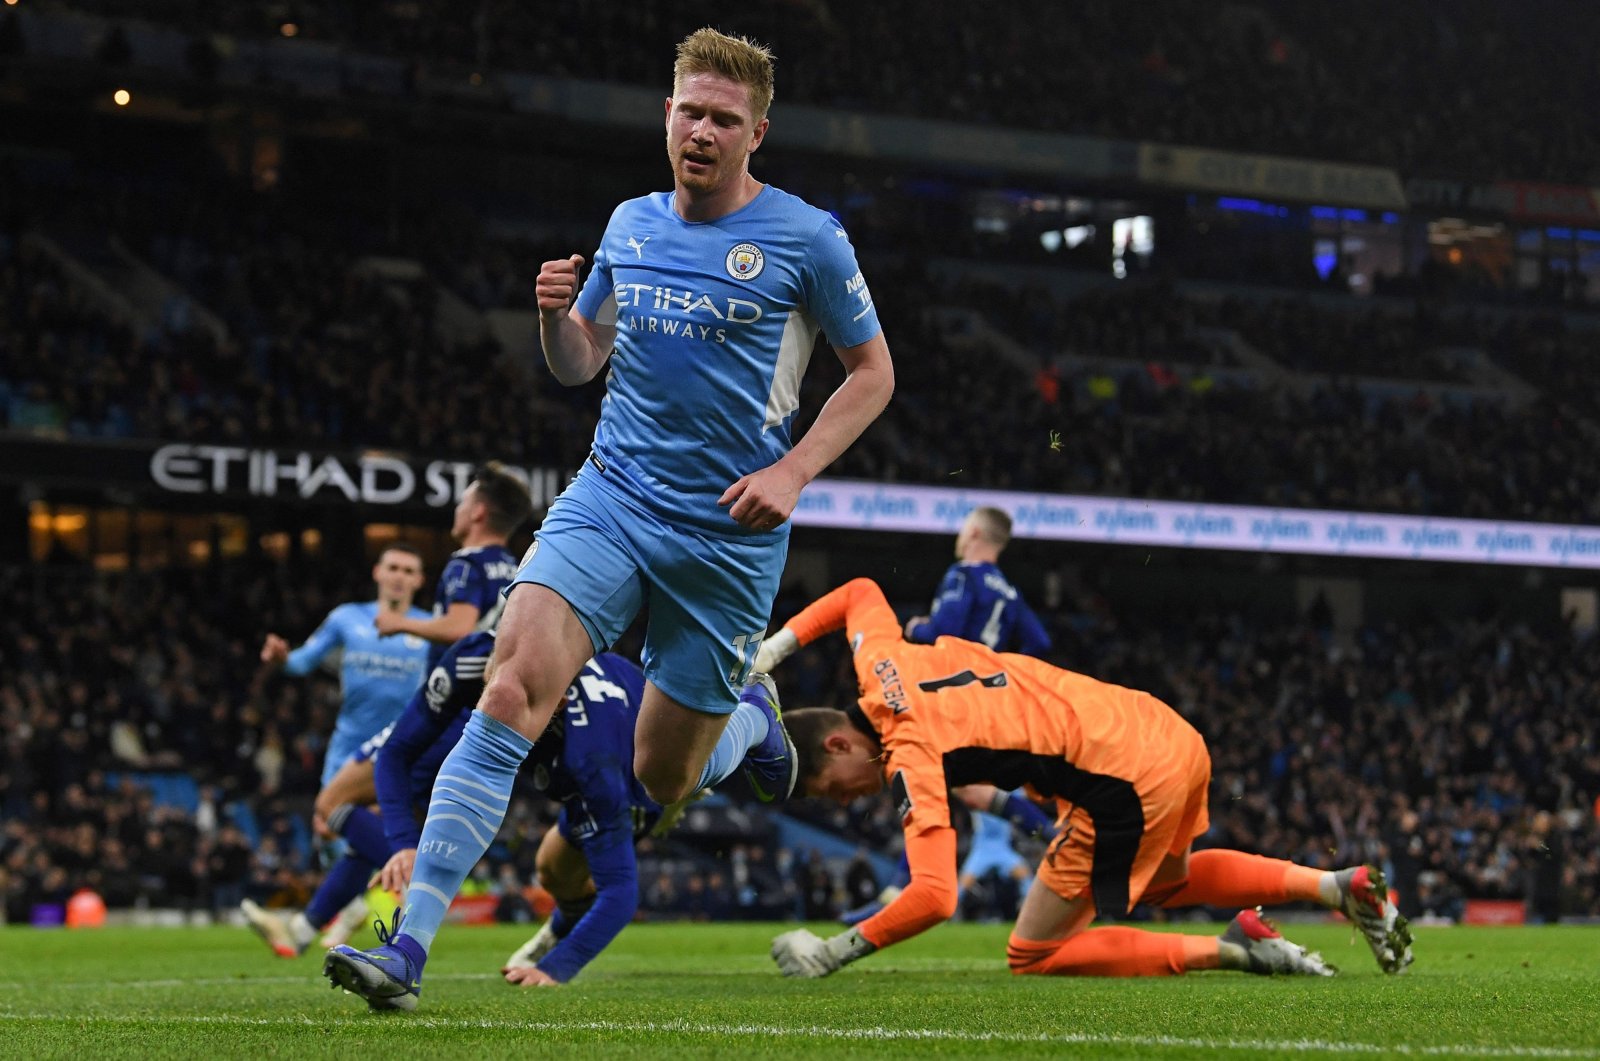 Manchester City&#039;s Kevin De Bruyne celebrates after scoring in a Premier League match against Leeds United at the Etihad Stadium, Manchester, England, Dec. 14, 2021. (AFP Photo)